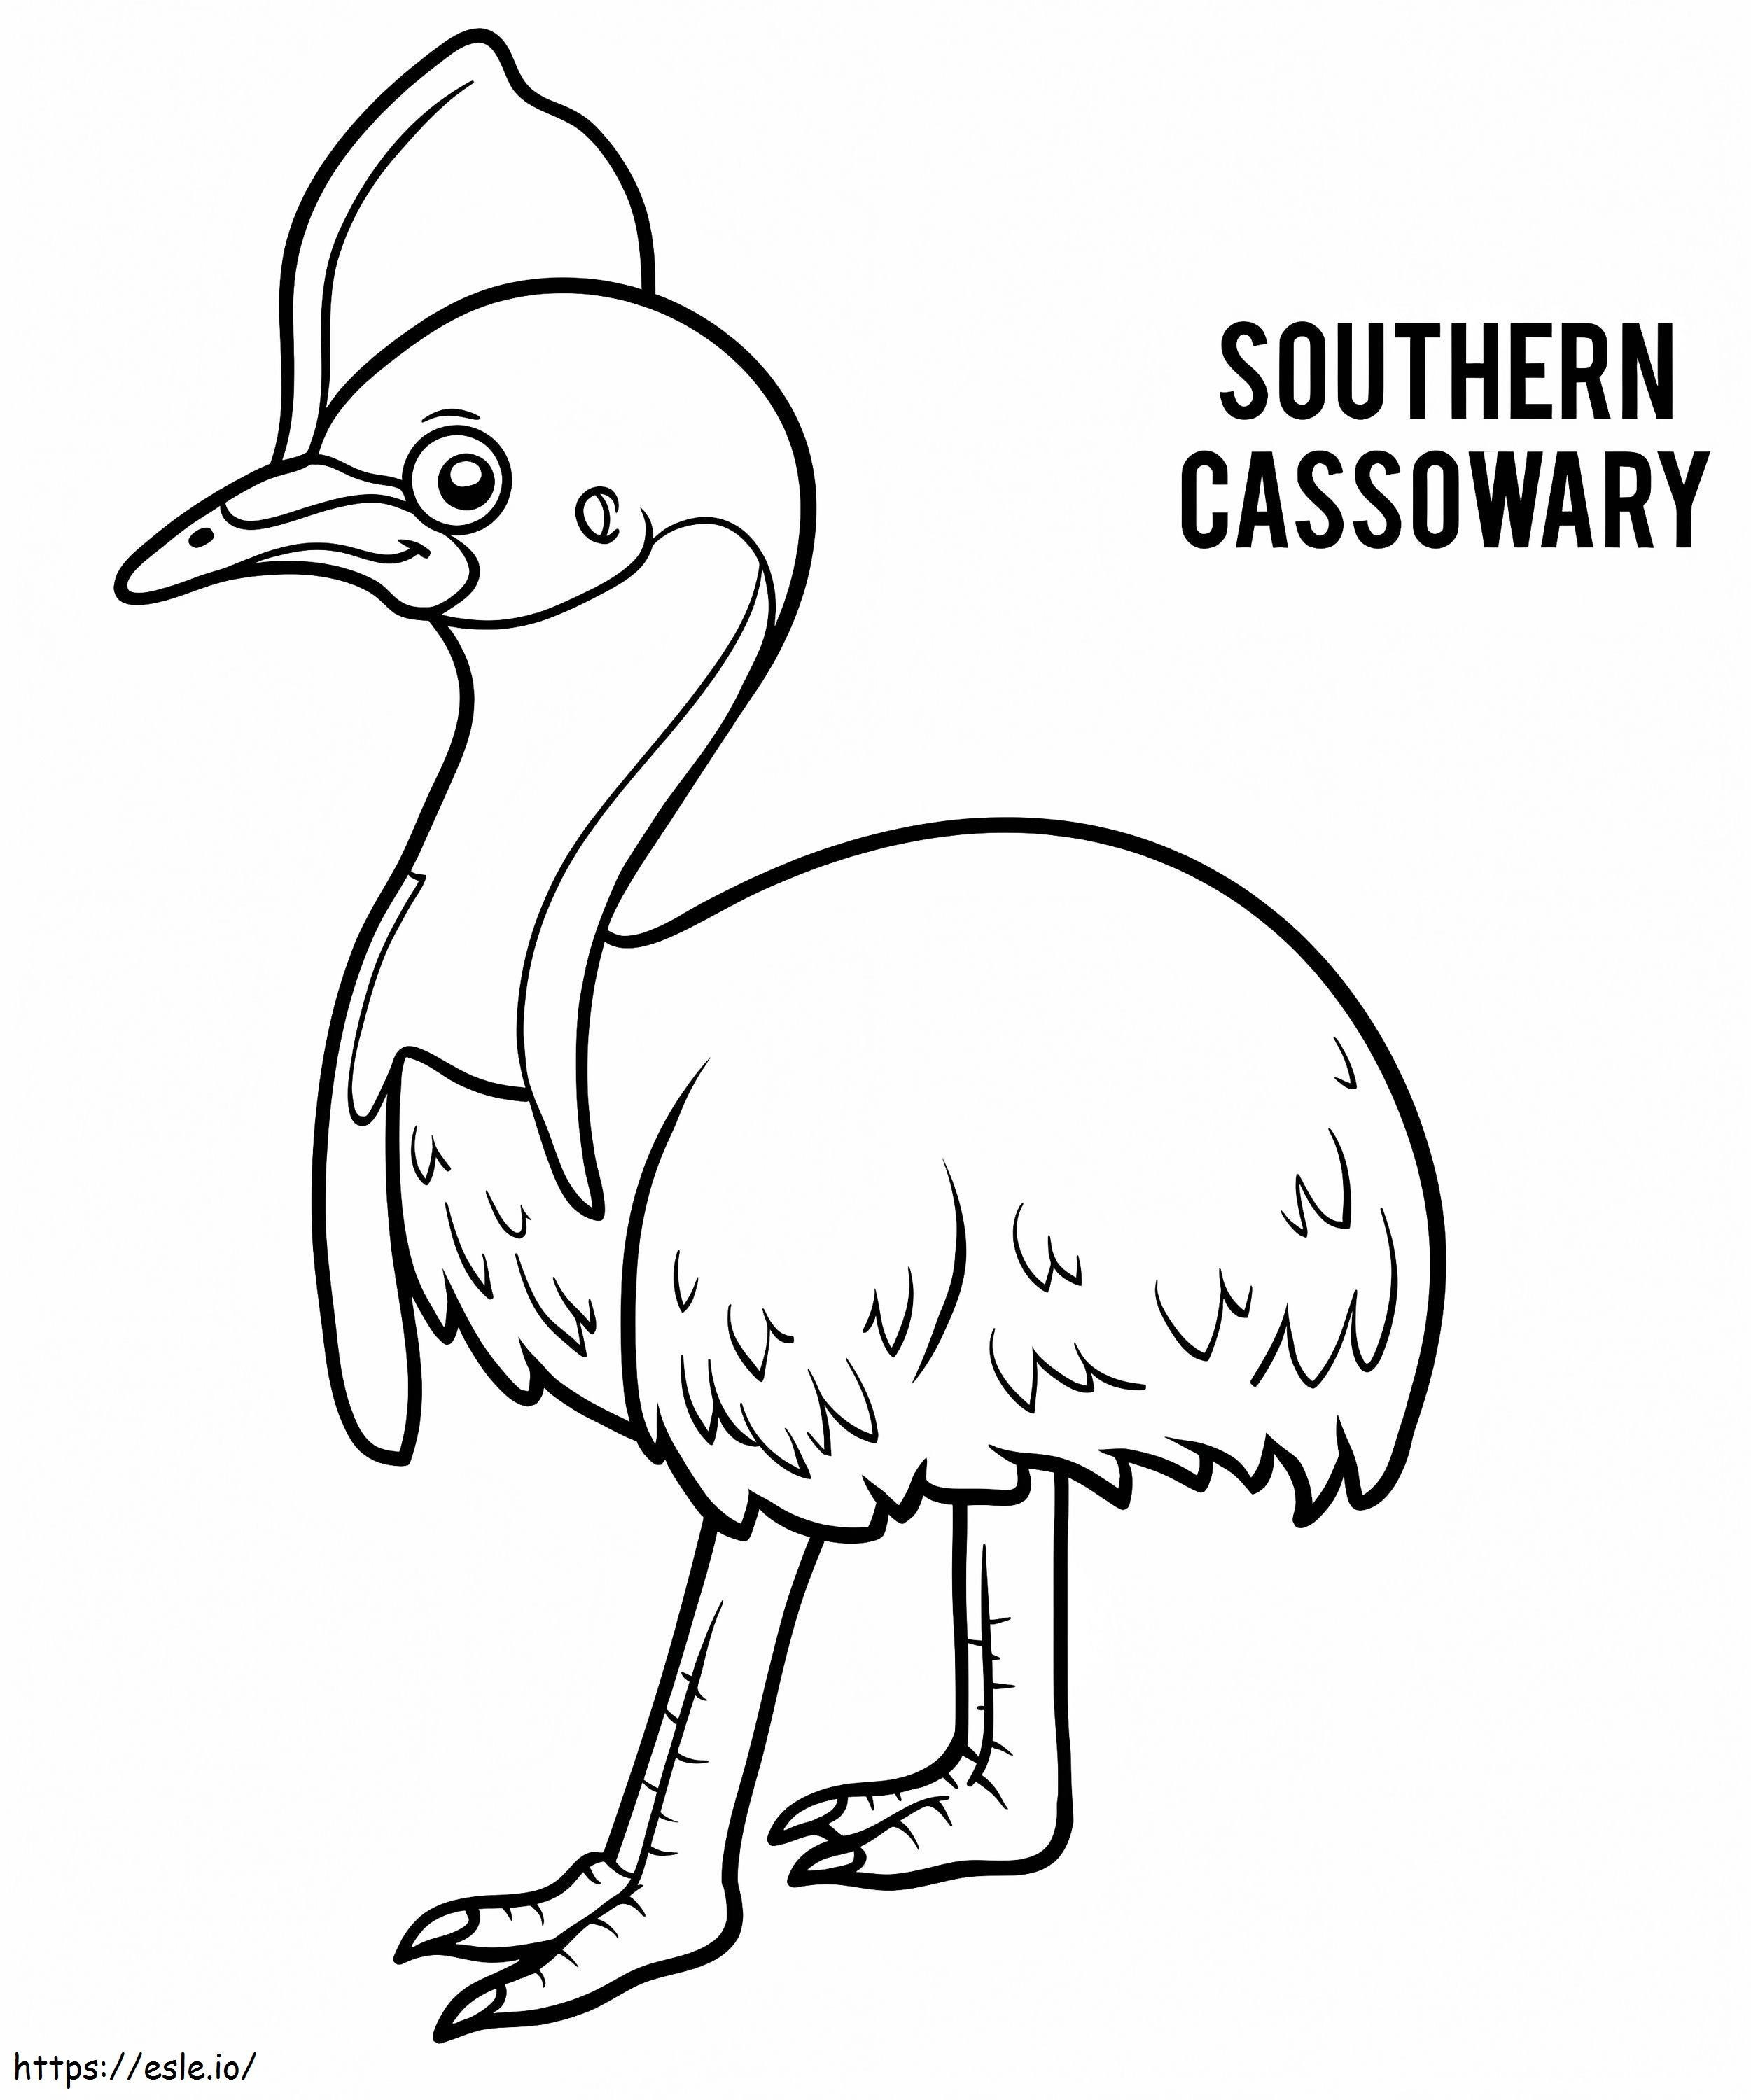 Cute Southern Cassowary coloring page